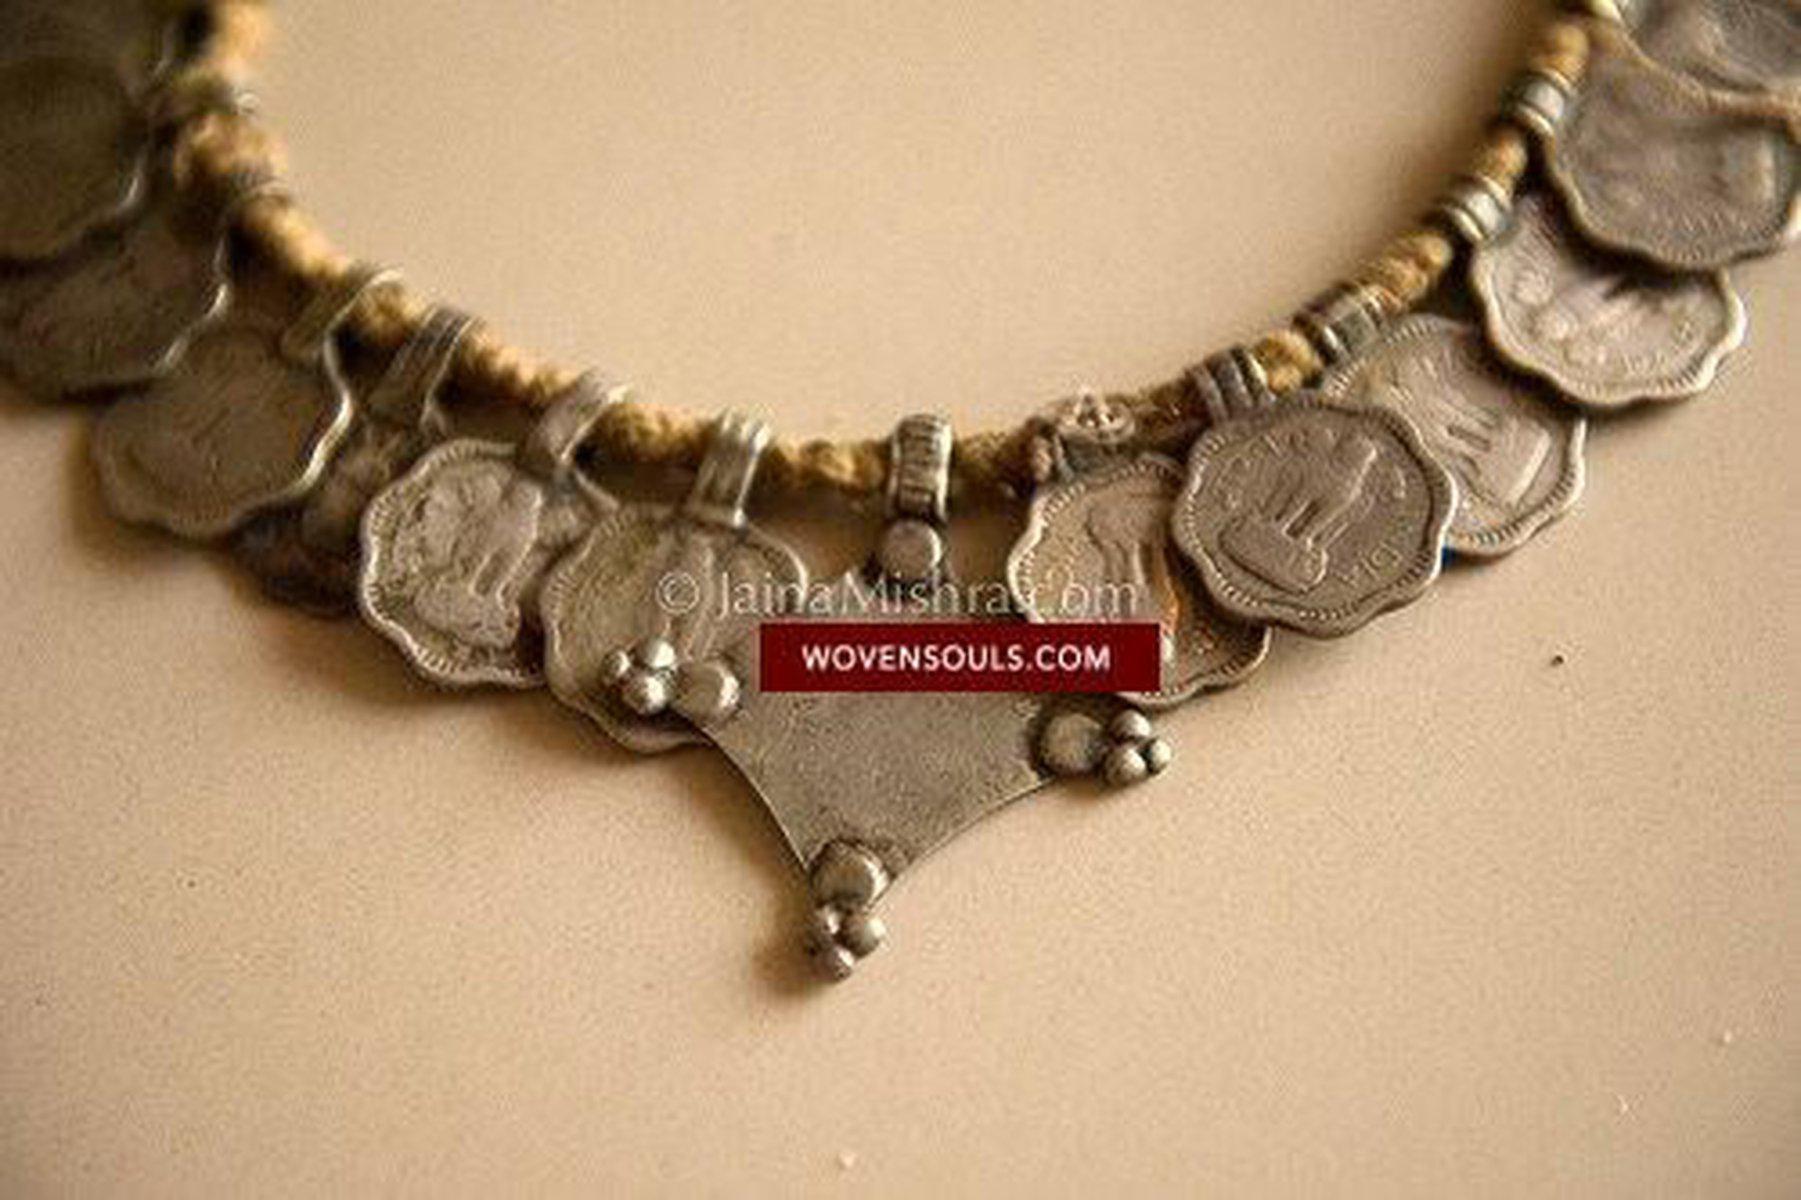 384 SOLD Vintage Garo Tribe Necklace with Coins - WOVENSOULS